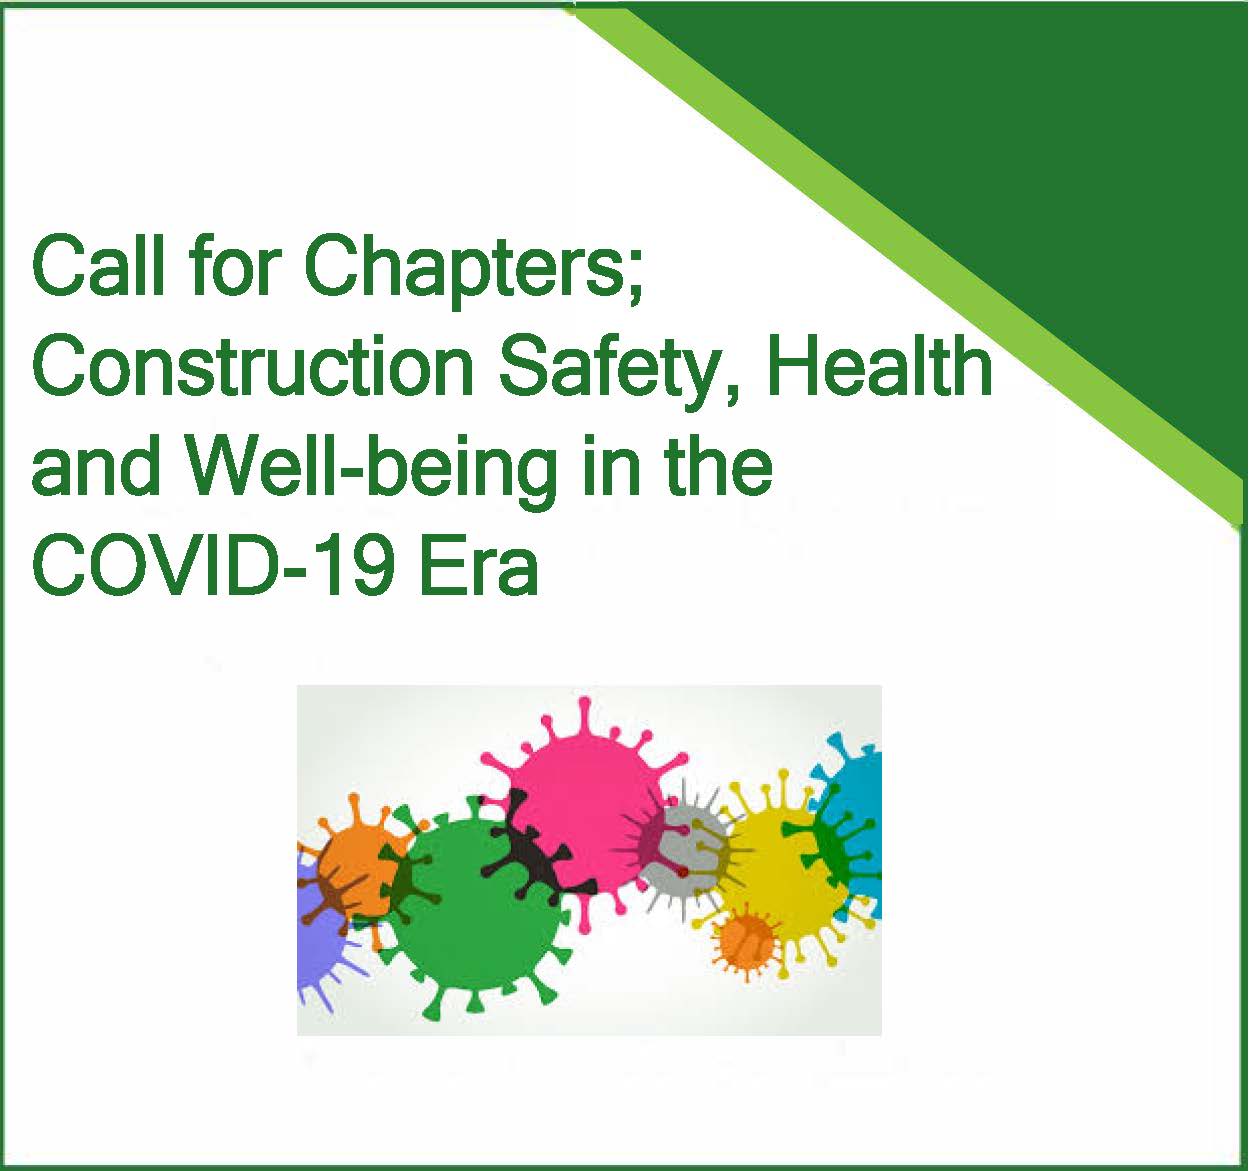 Call for Chapters: Construction Safety, Health and Well-being in the COVID-19 Era